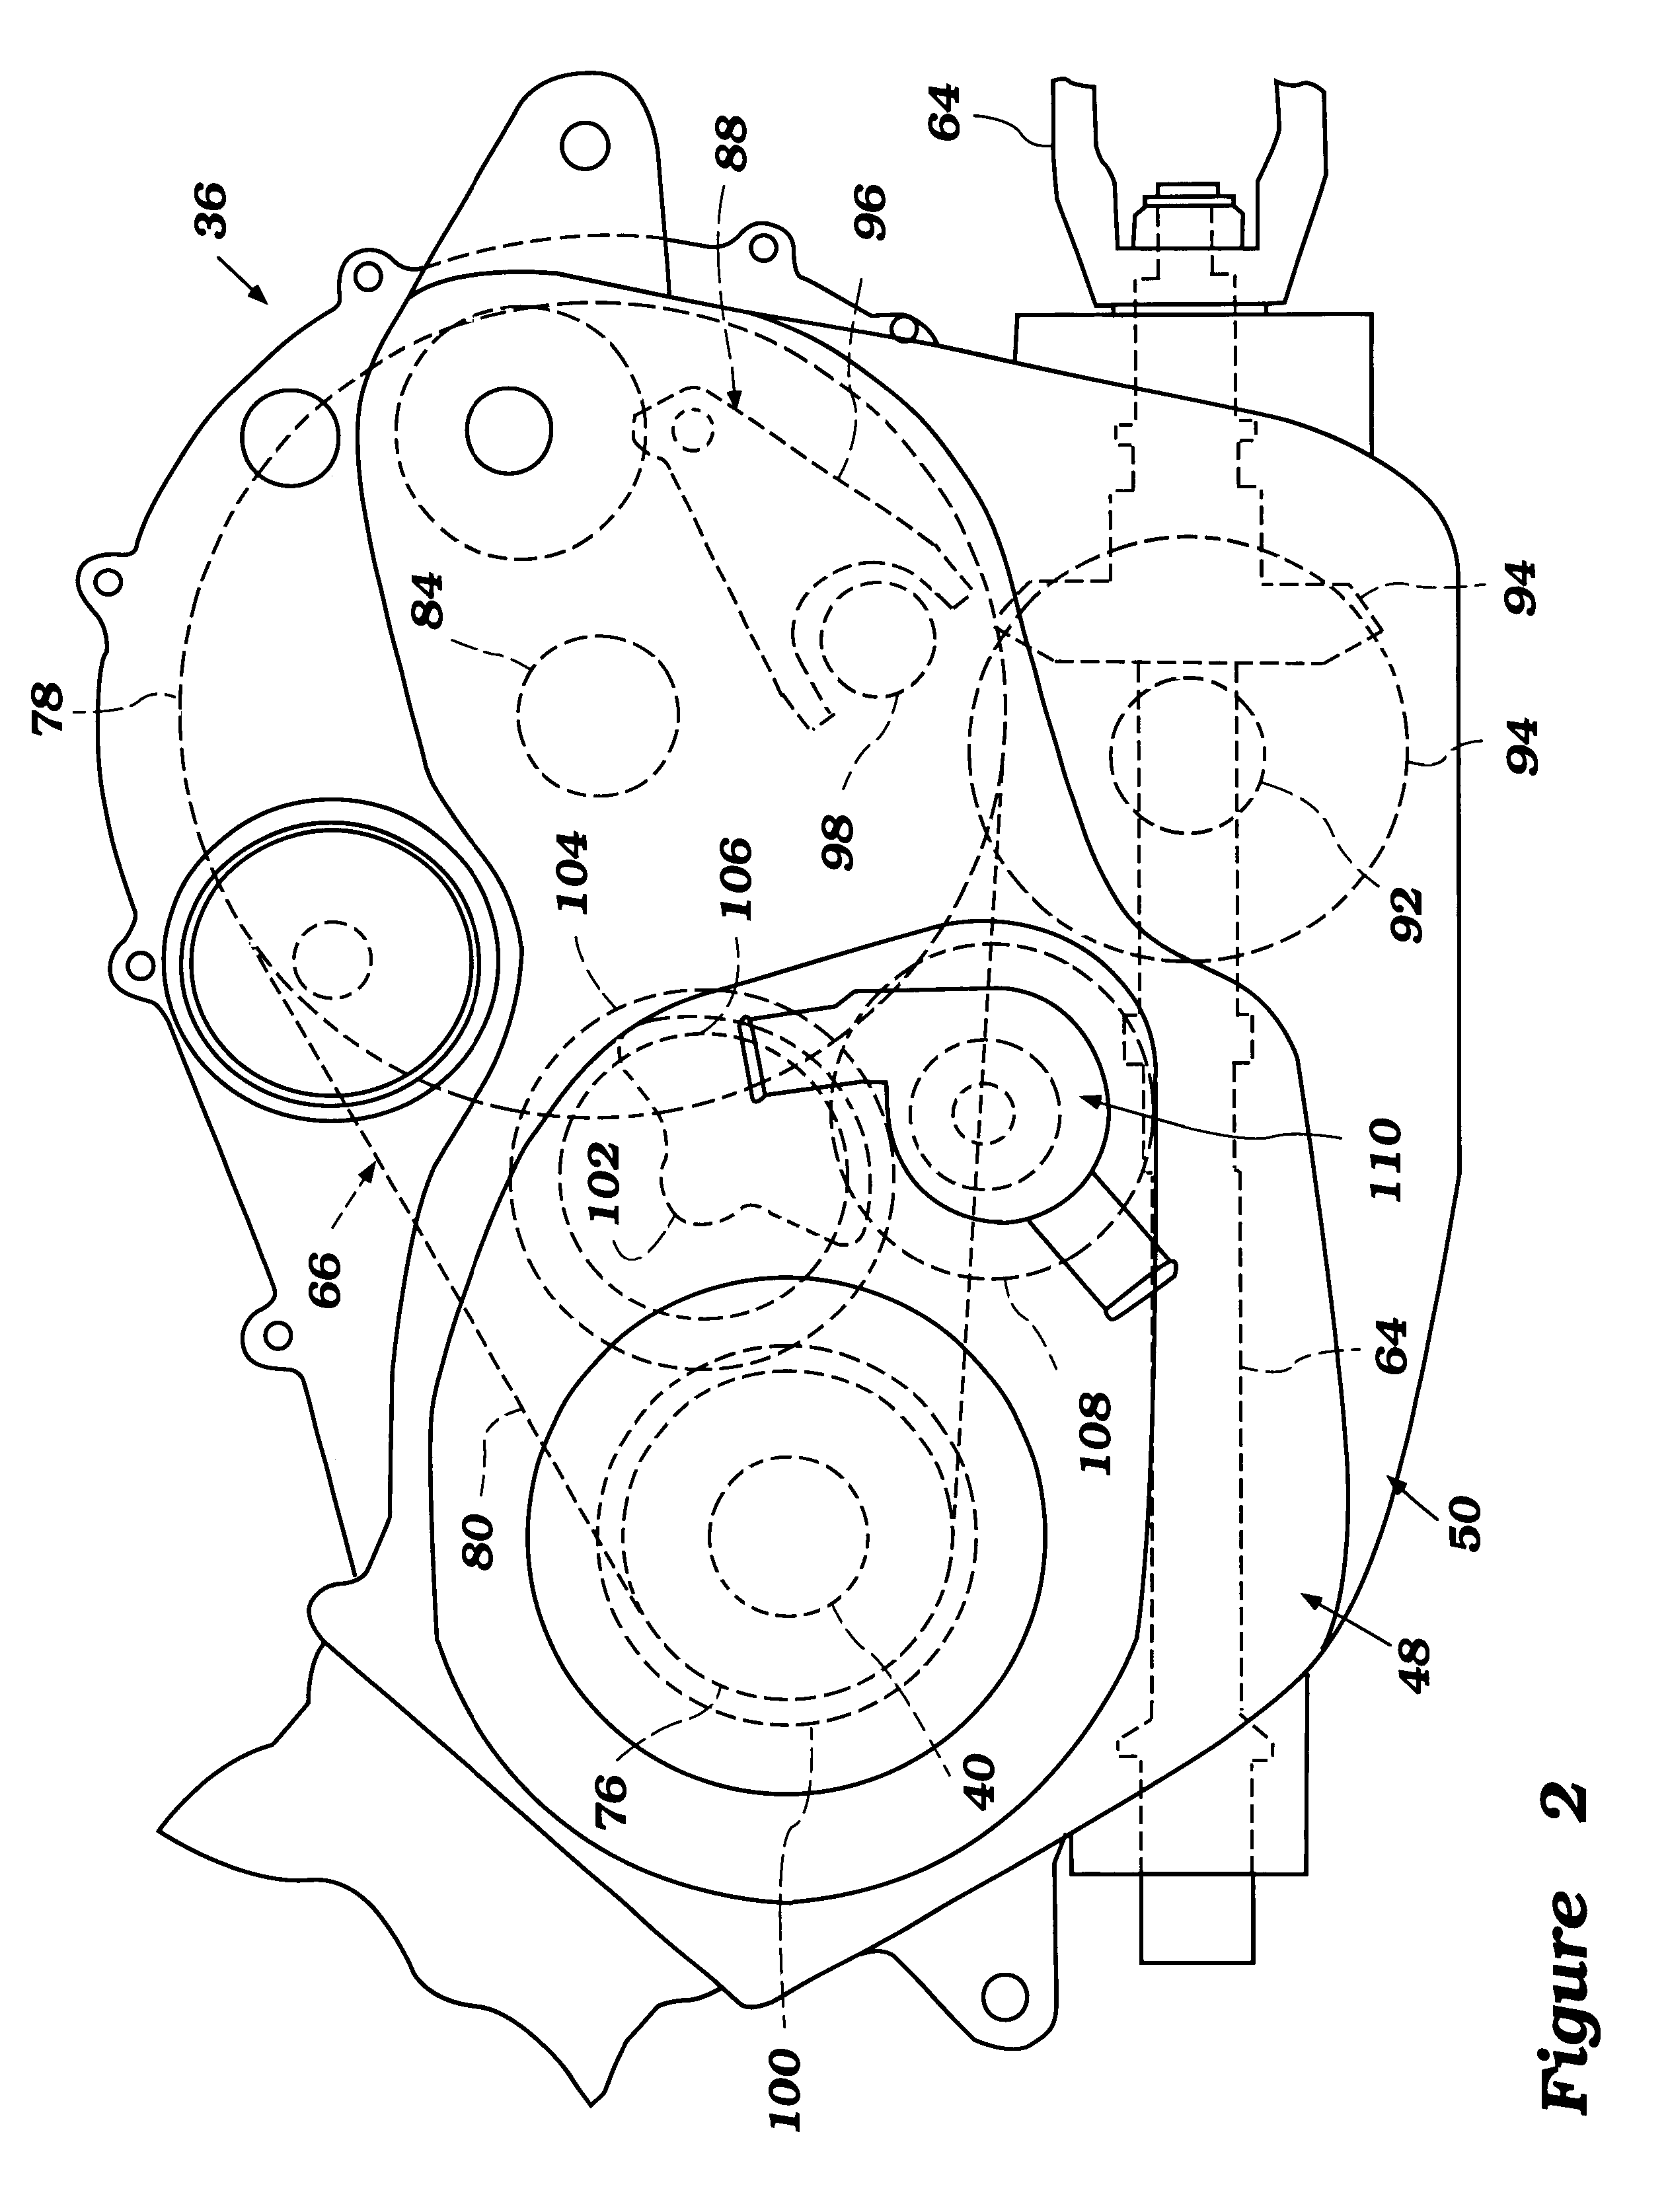 Transmission cover and supporting arrangement for all terrain vehicle